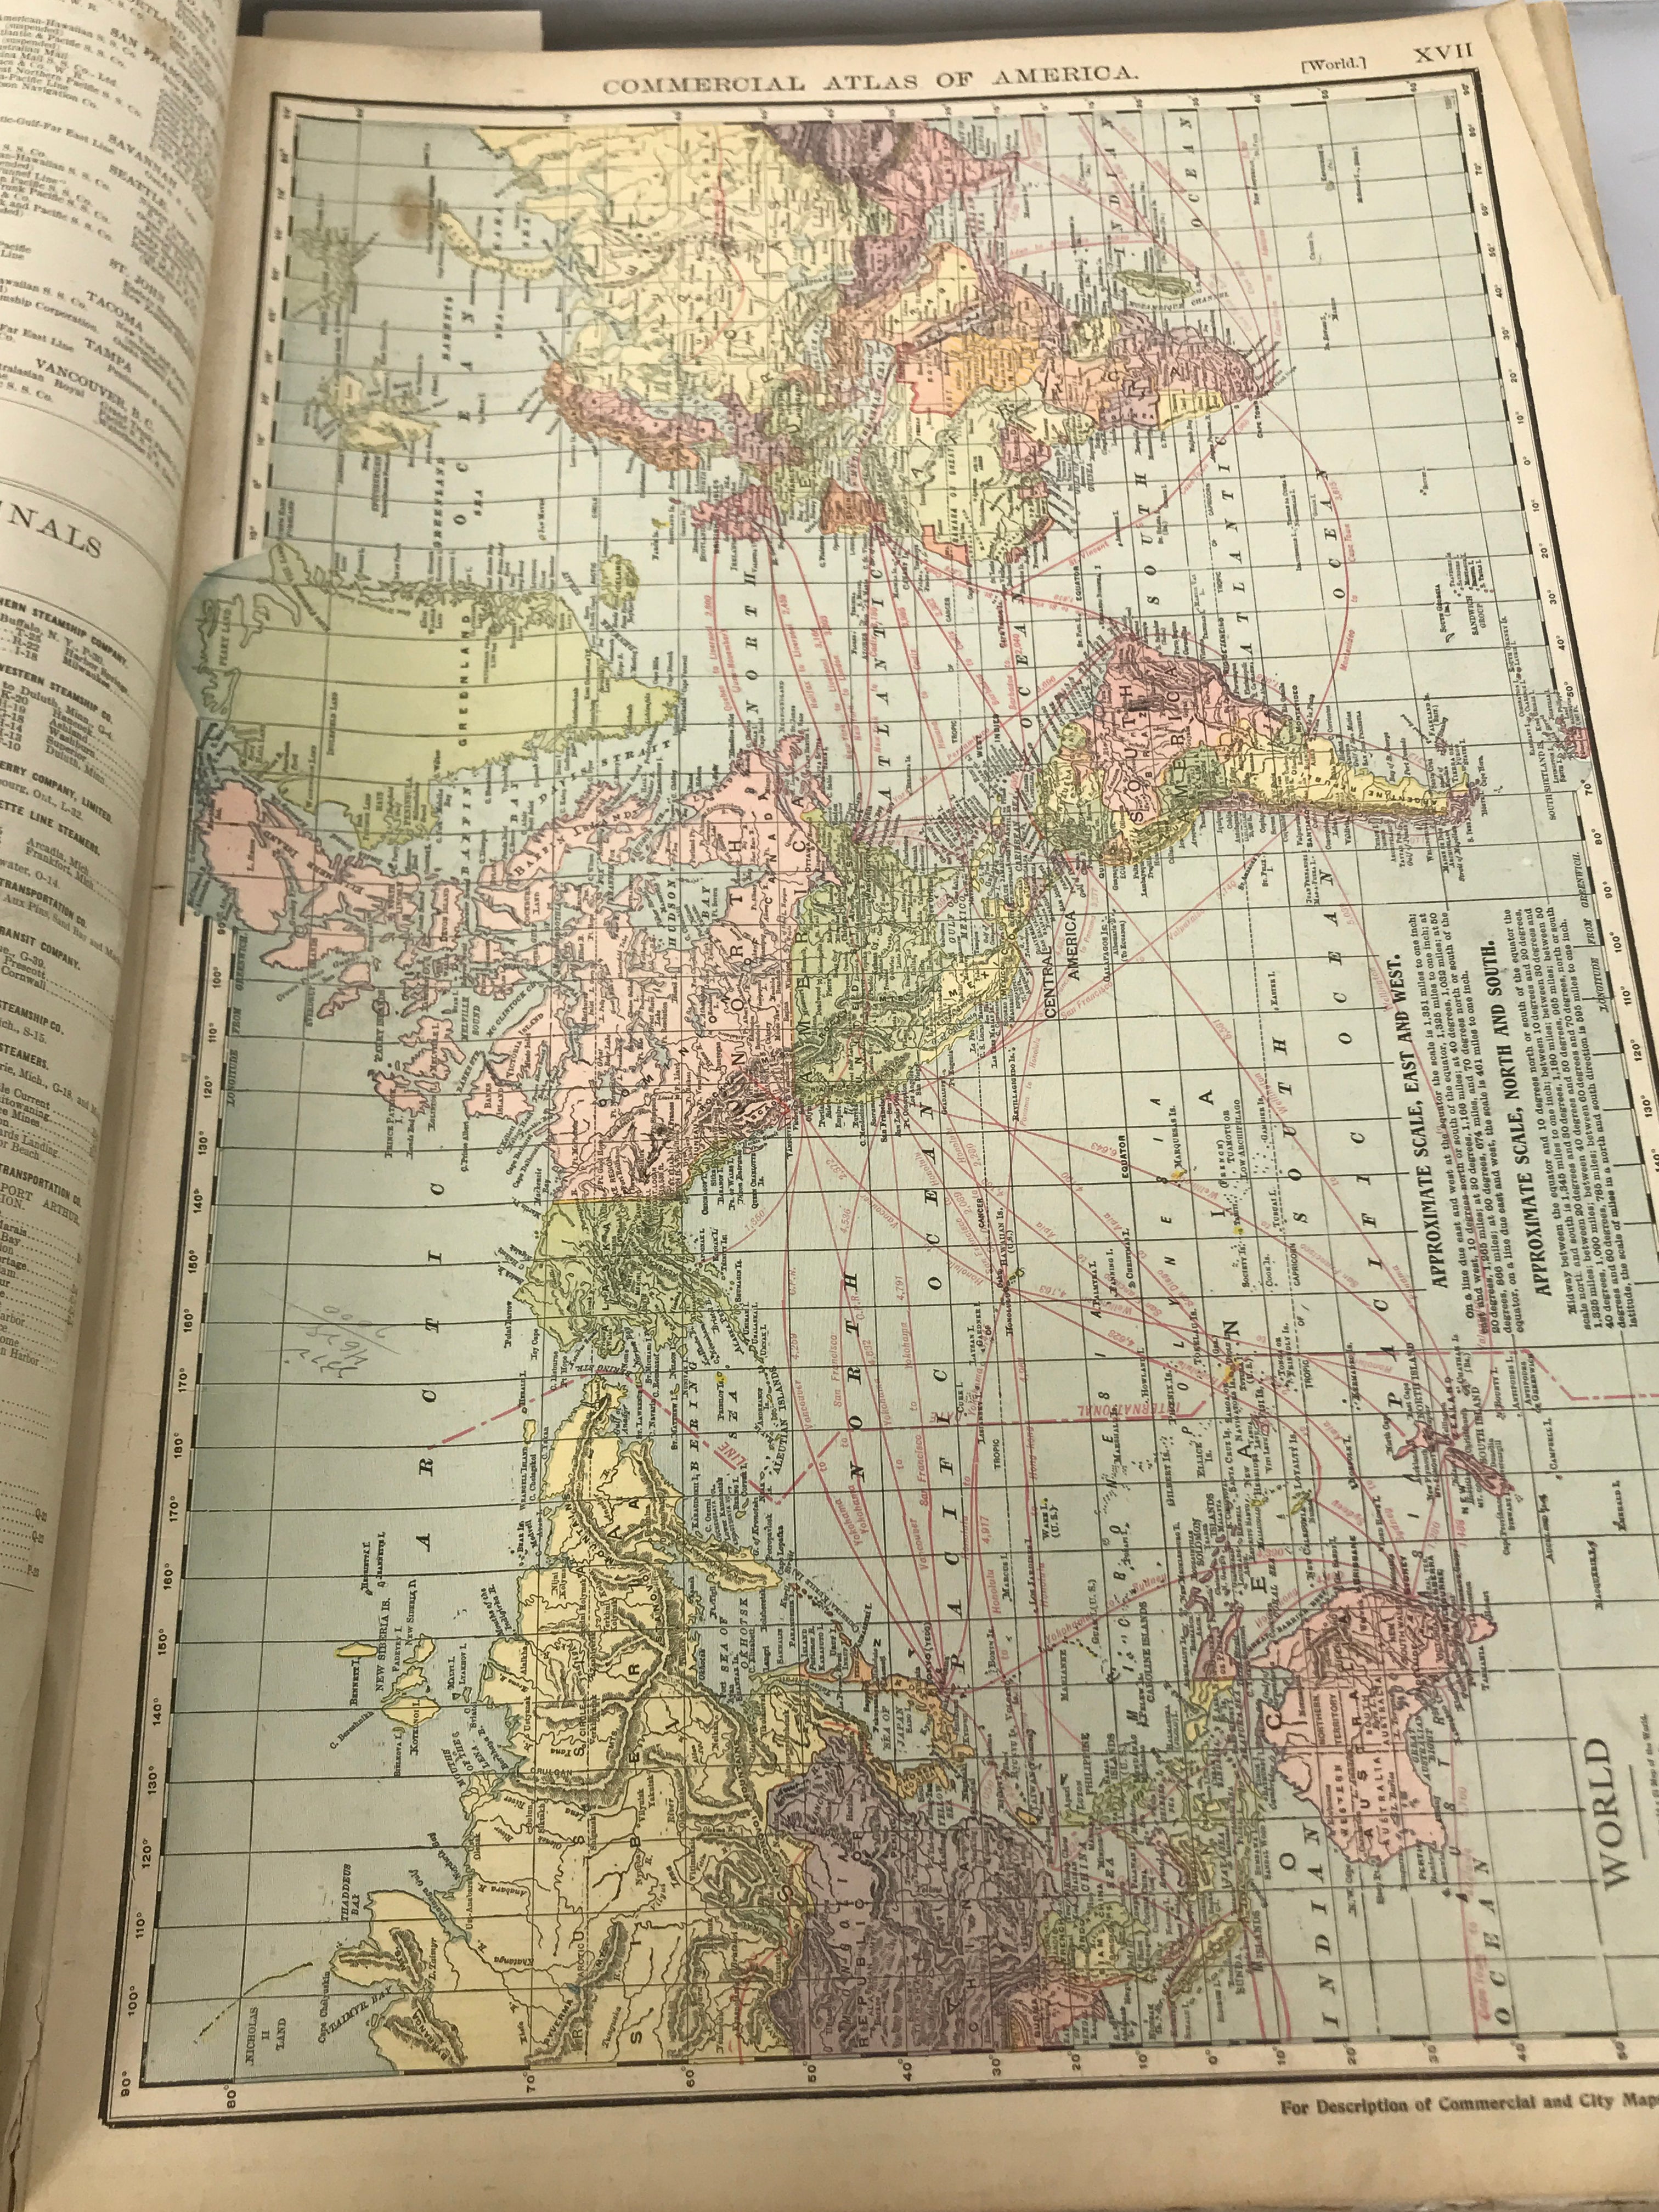 Rand McNally Commercial Atlas of America 1918 Edition HC Antique